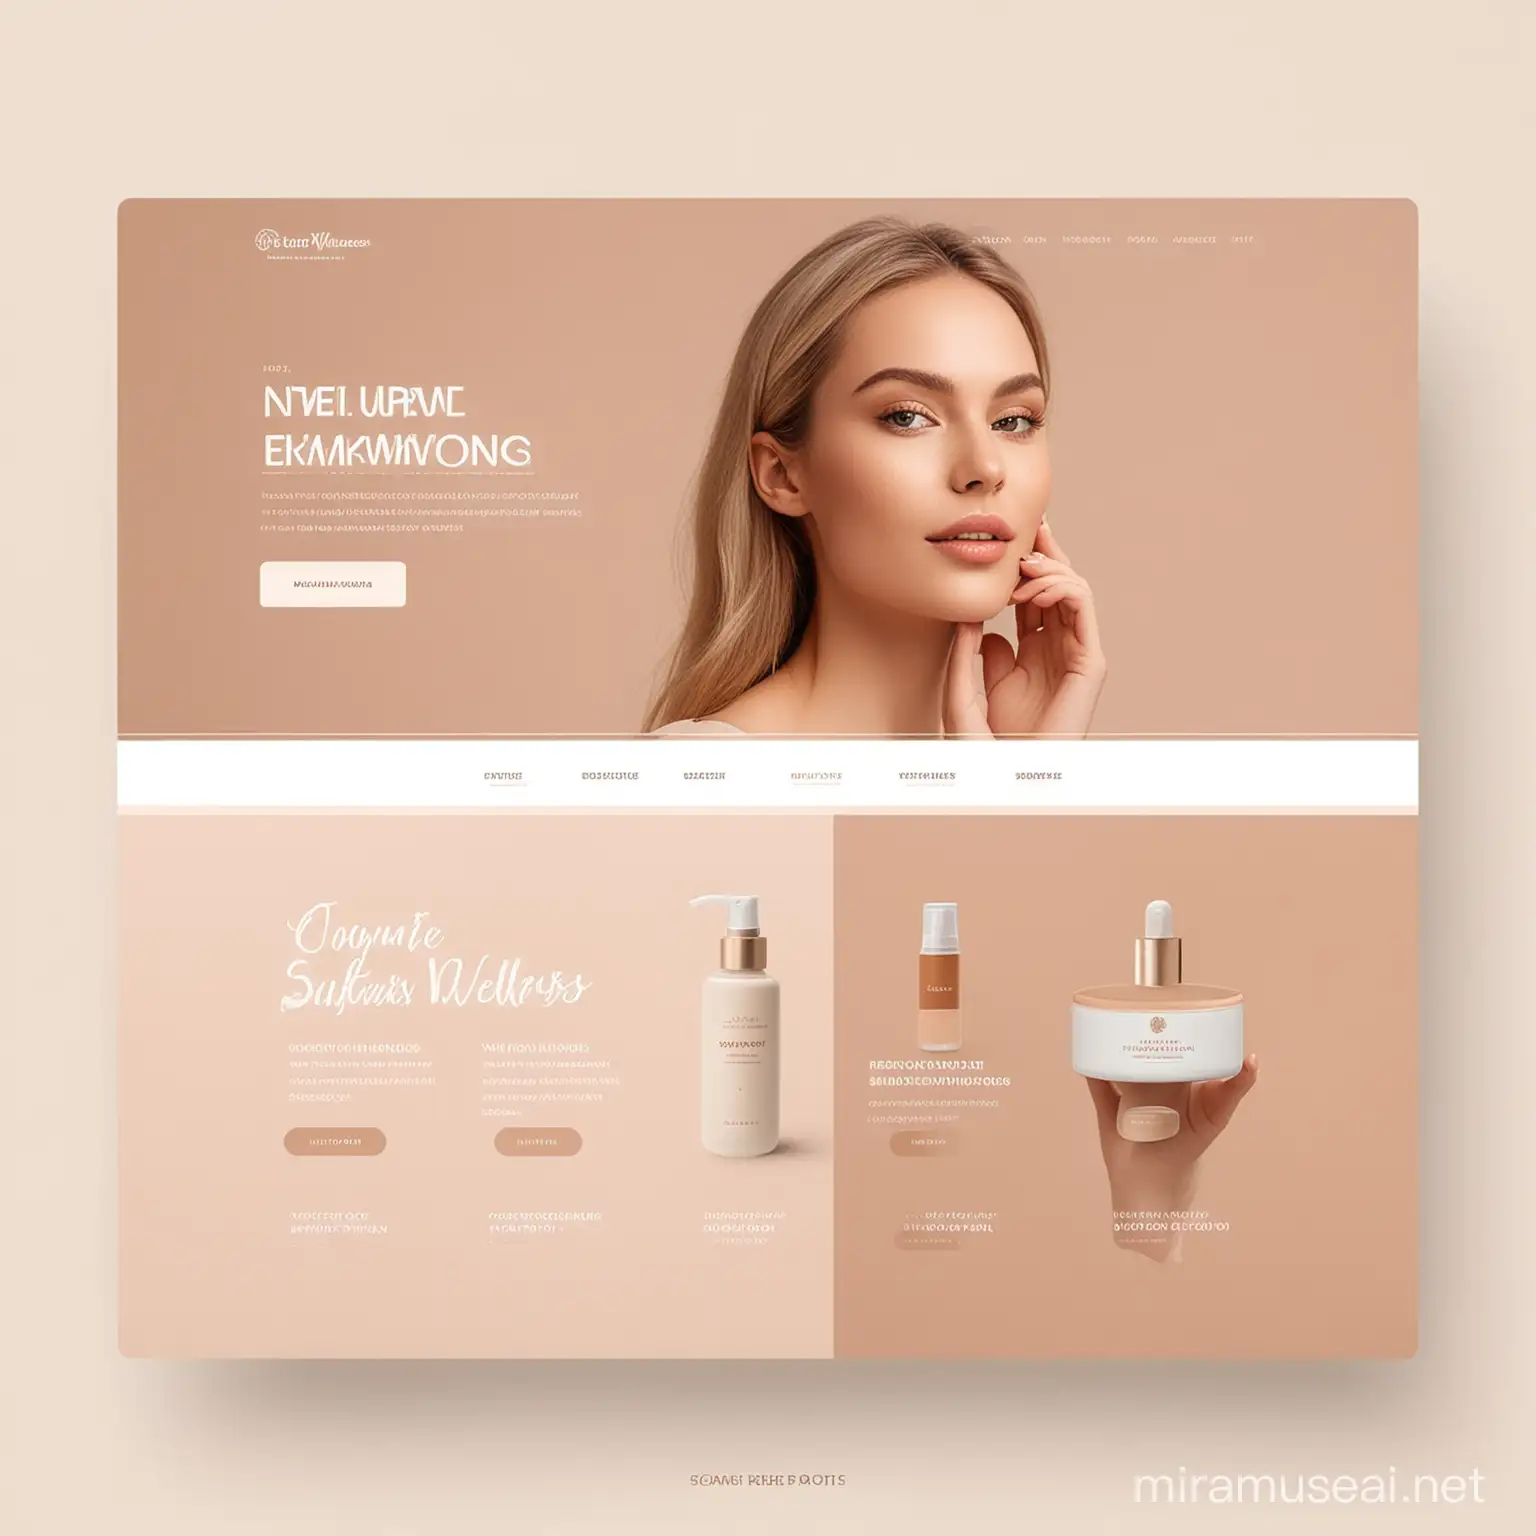 website, ui/ux, beauty and wellness white and nude color, 
ecommerce,  full page